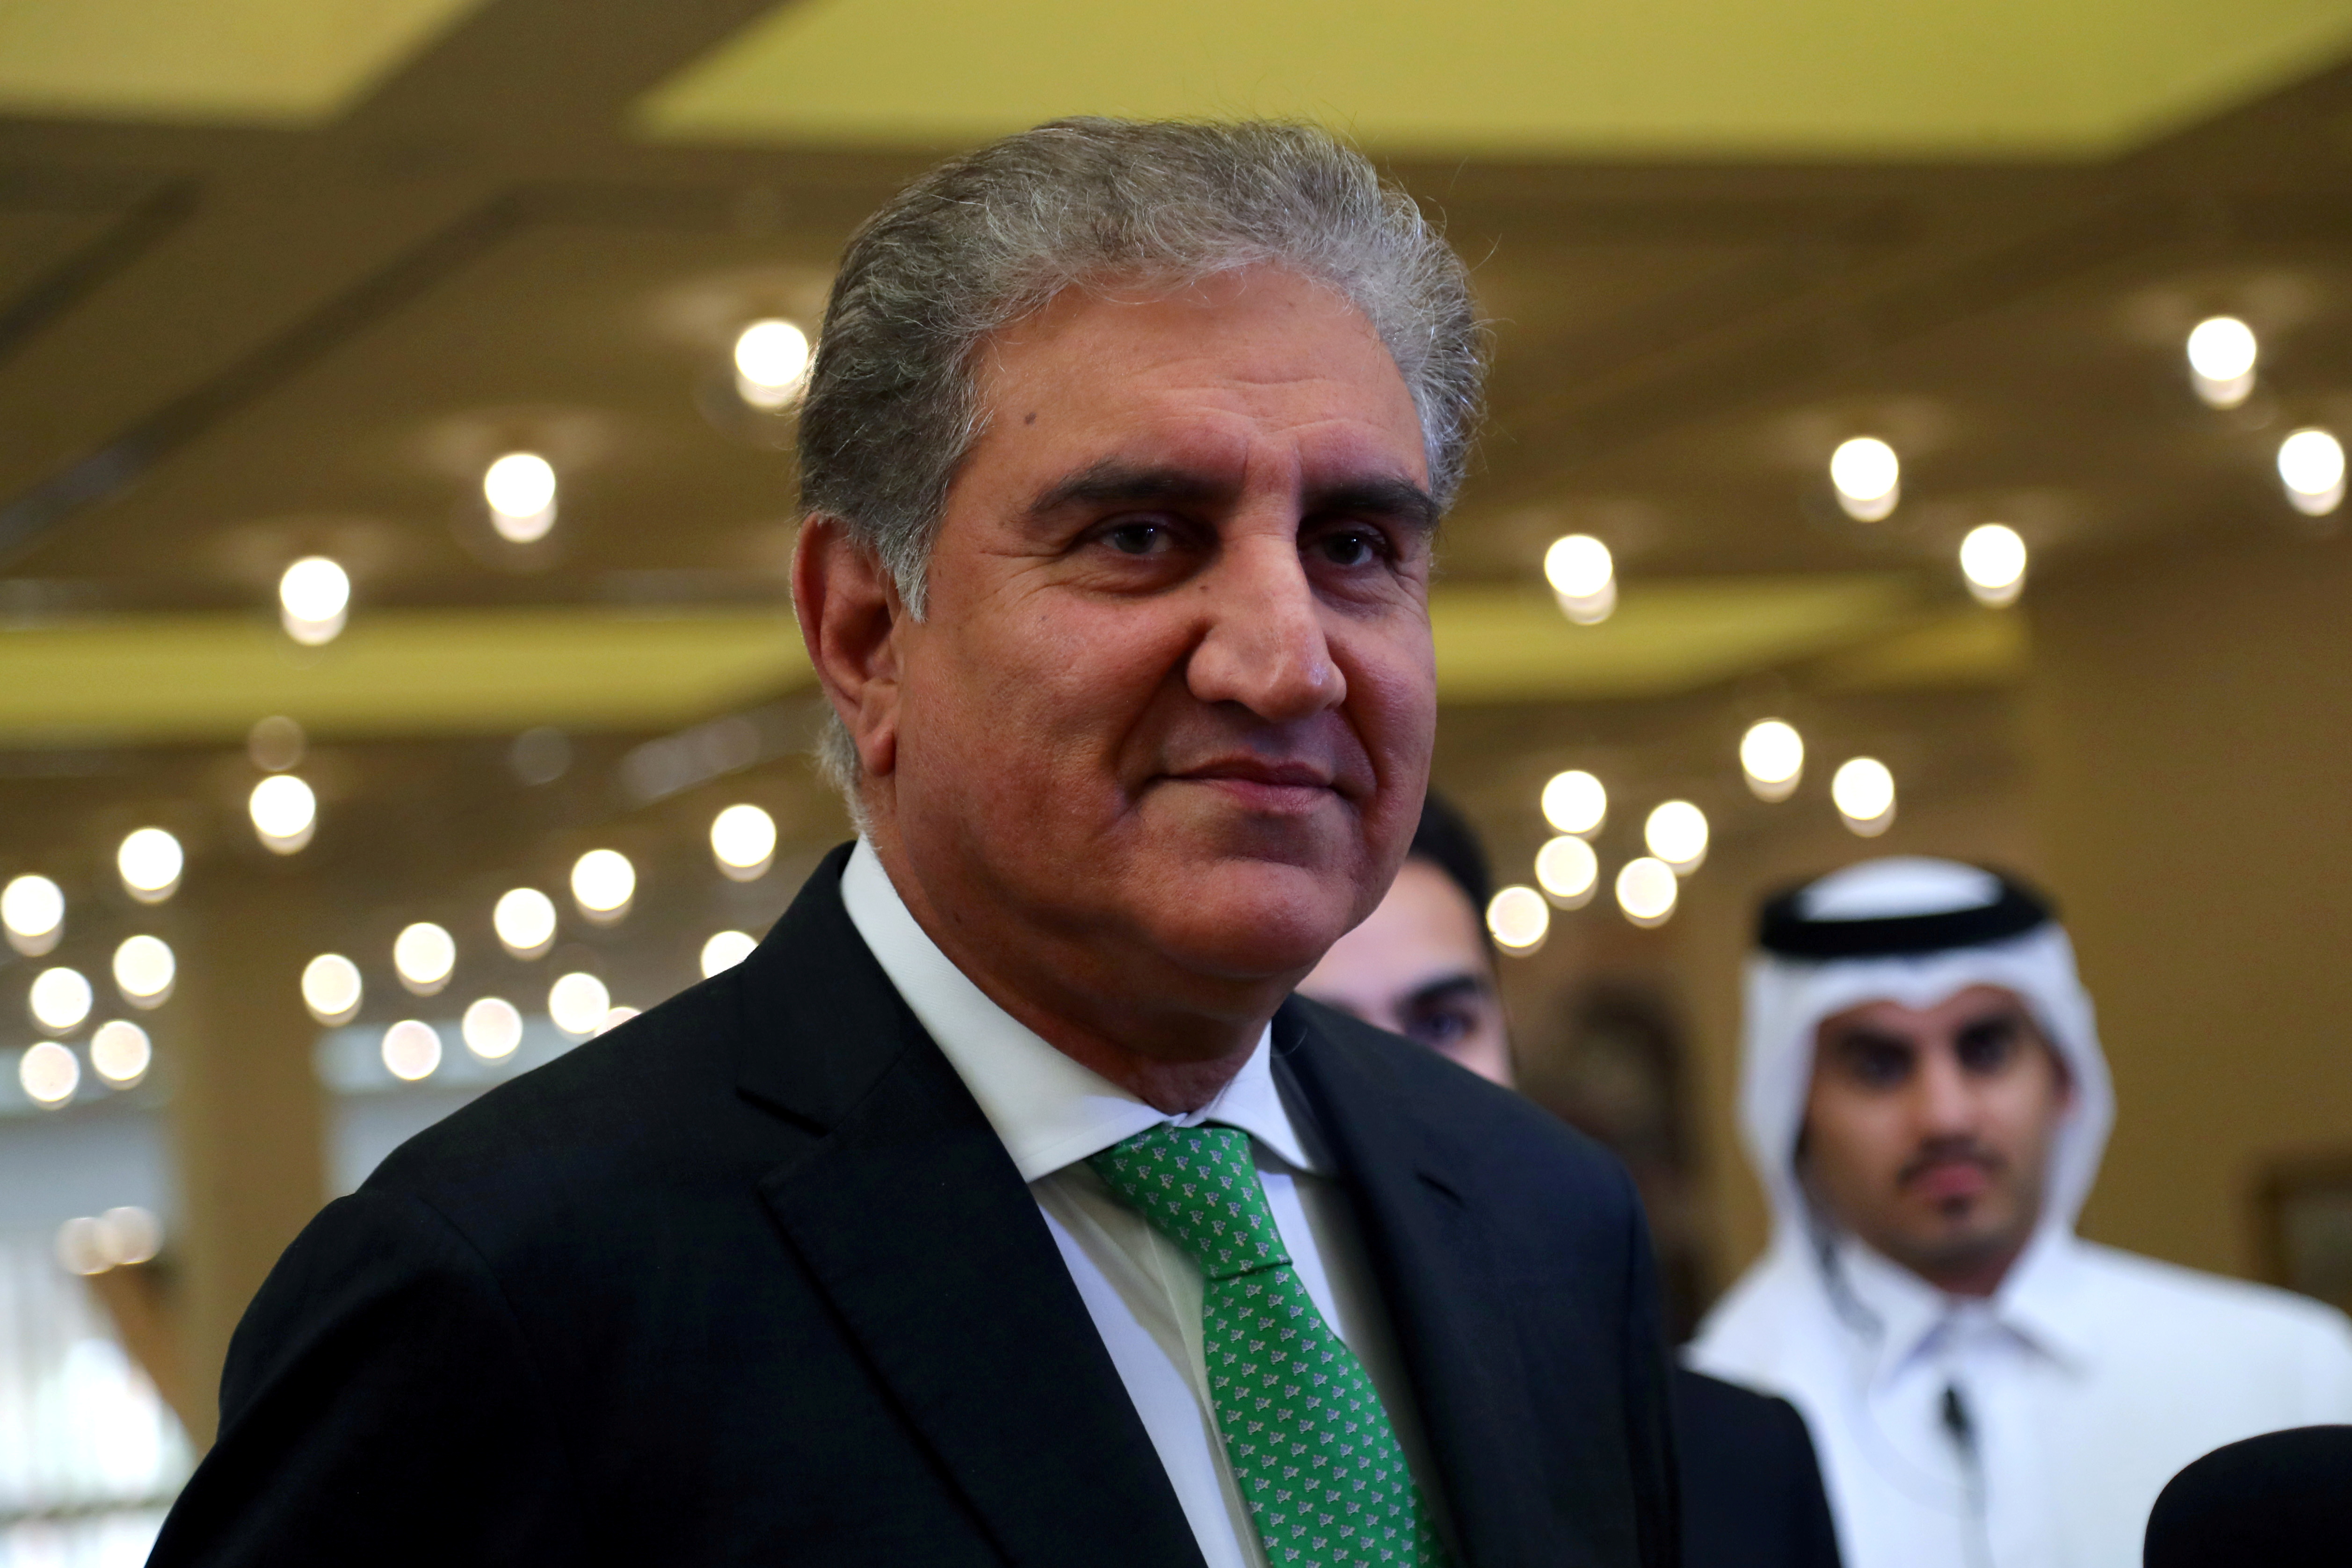 Pakistan's Foreign Minister Shah Mahmood Qureshi is seen, ahead of an agreement signing between members of Afghanistan's Taliban delegation and U.S. officials in Doha